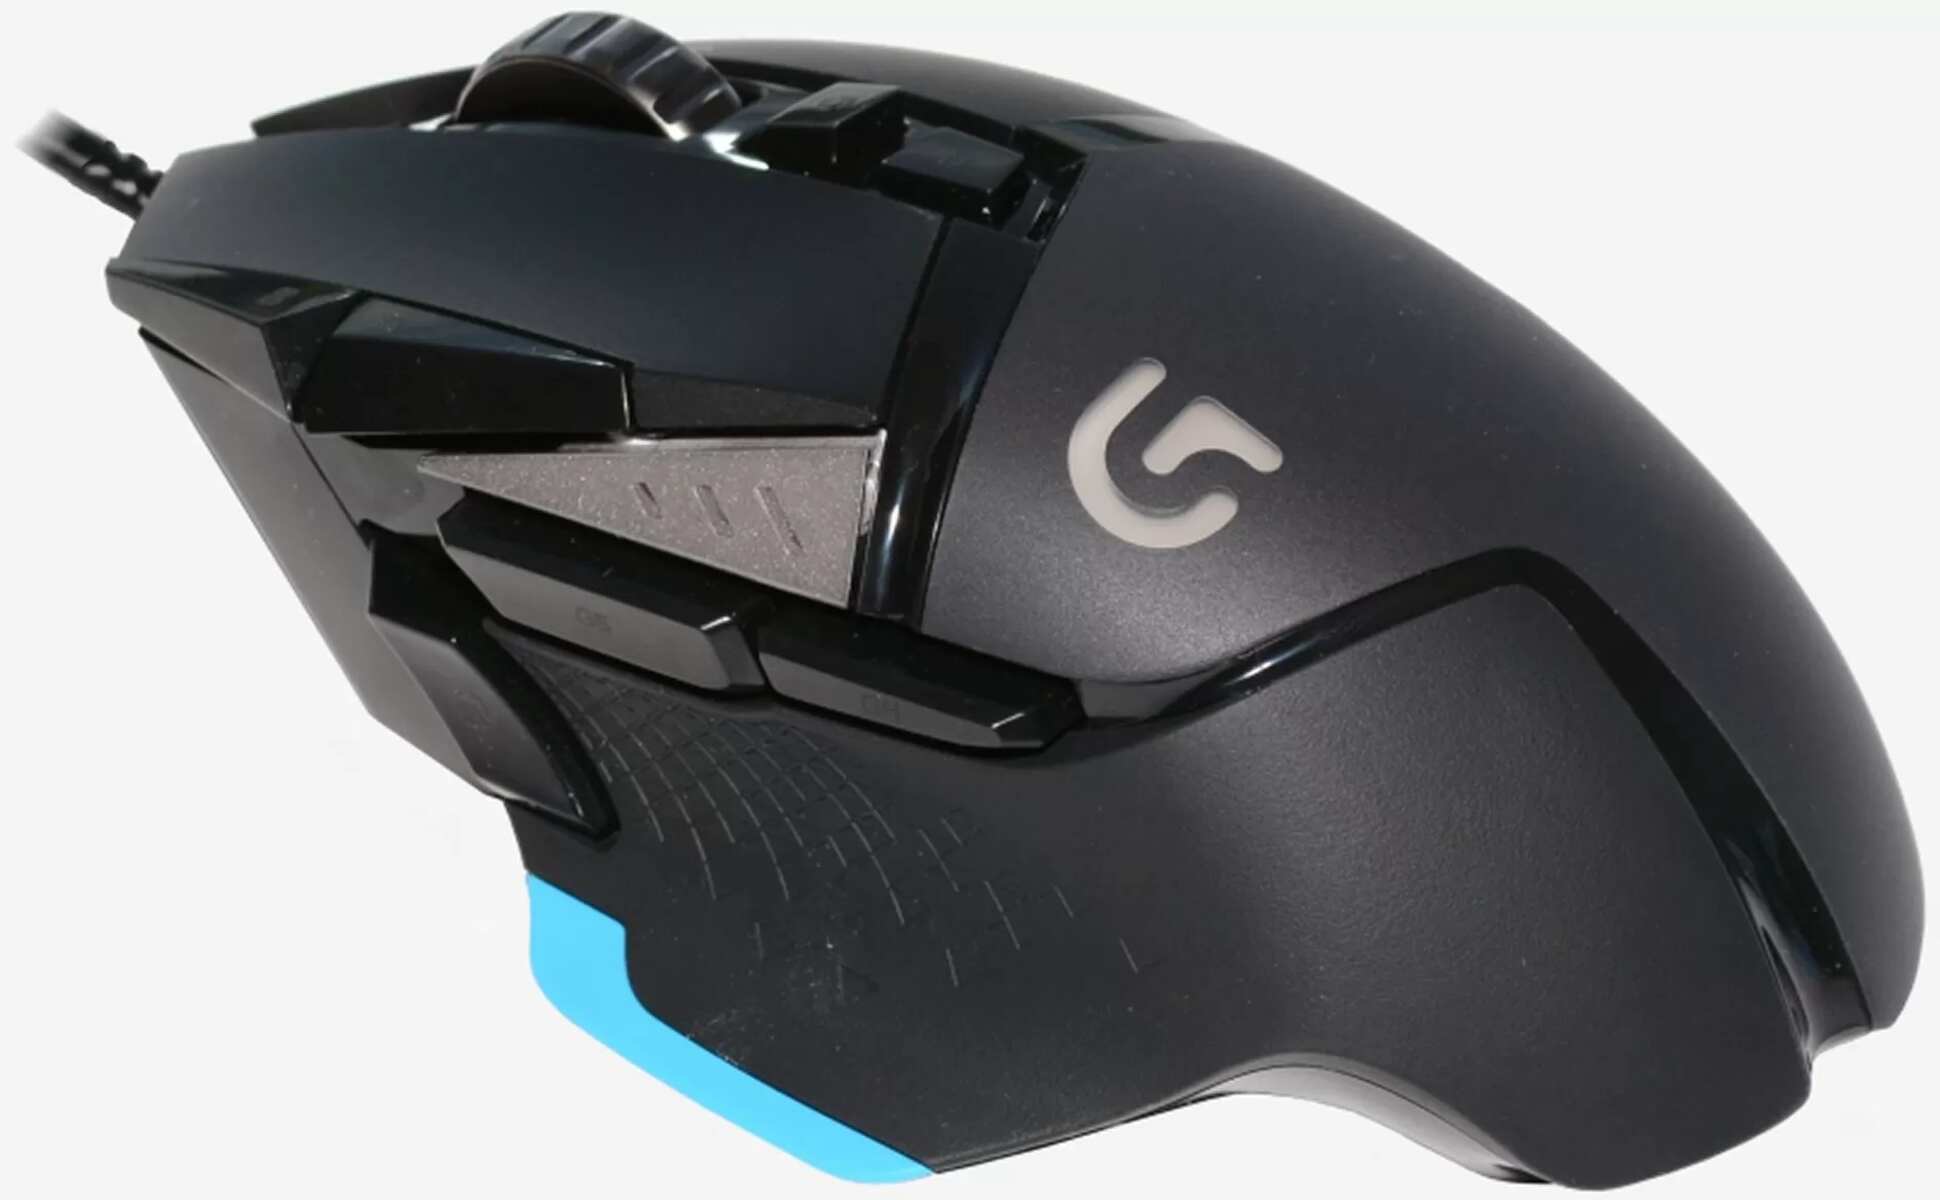 how-to-setup-g502-proteus-core-tunable-gaming-mouse